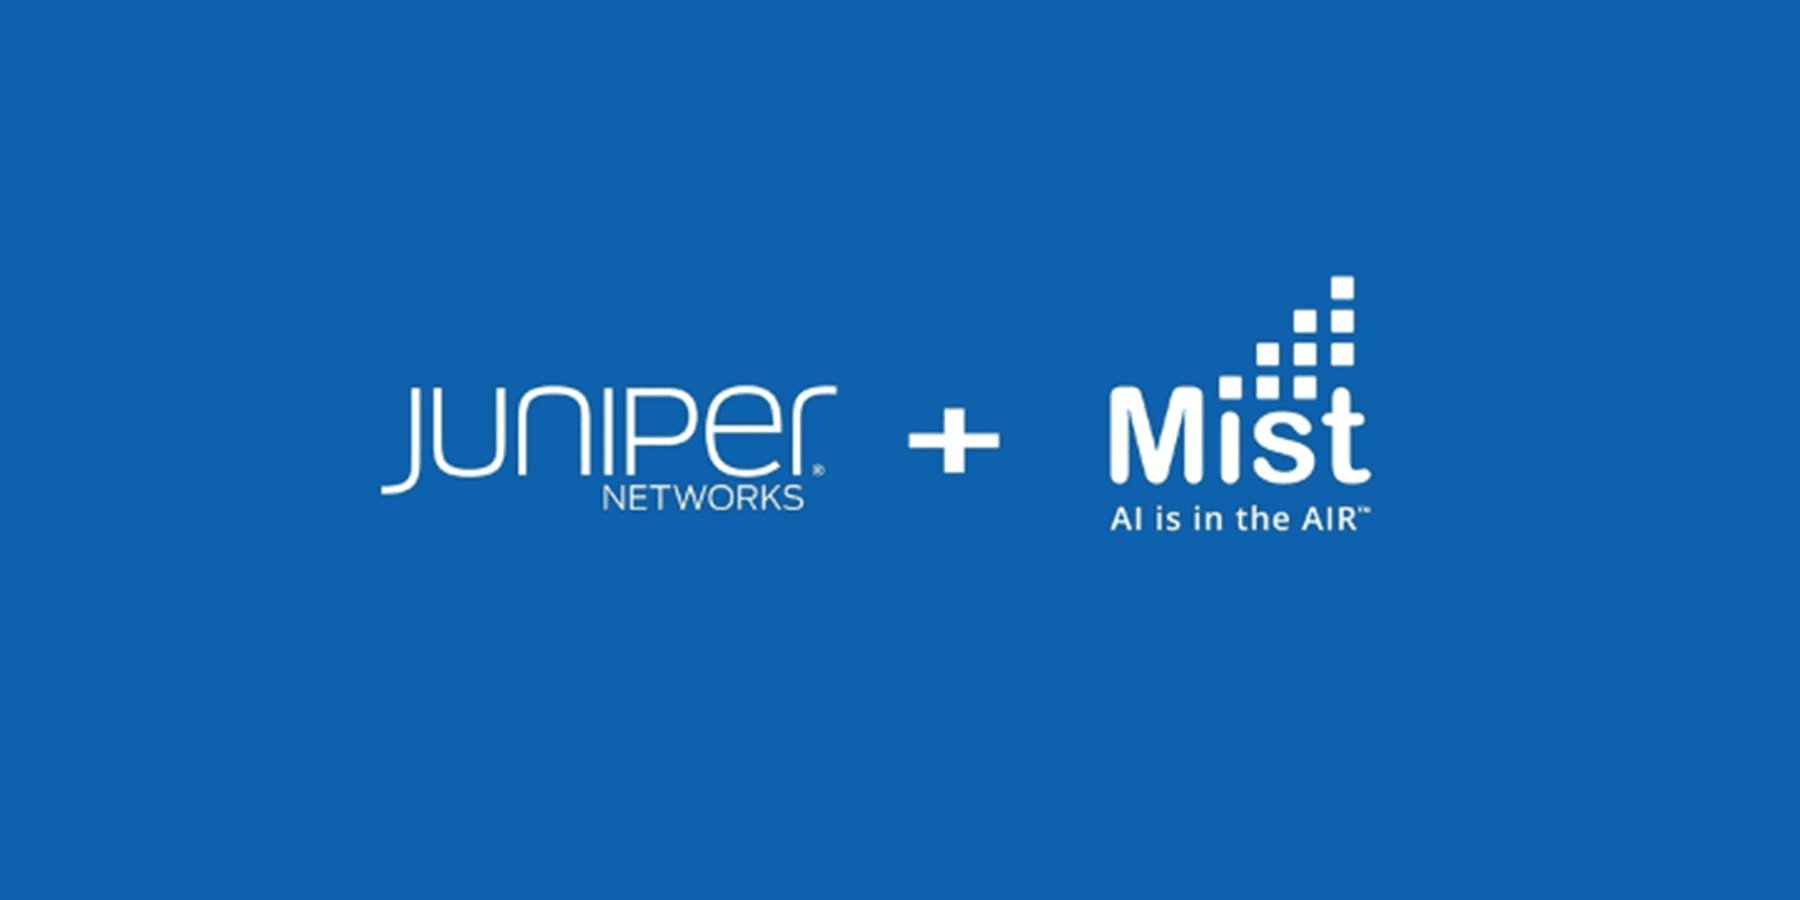 Celebrating a Momentous Mist-iversary! Looking Back and Forward at Mist Systems’ Importance to Juniper Networks and AI-Native Networking